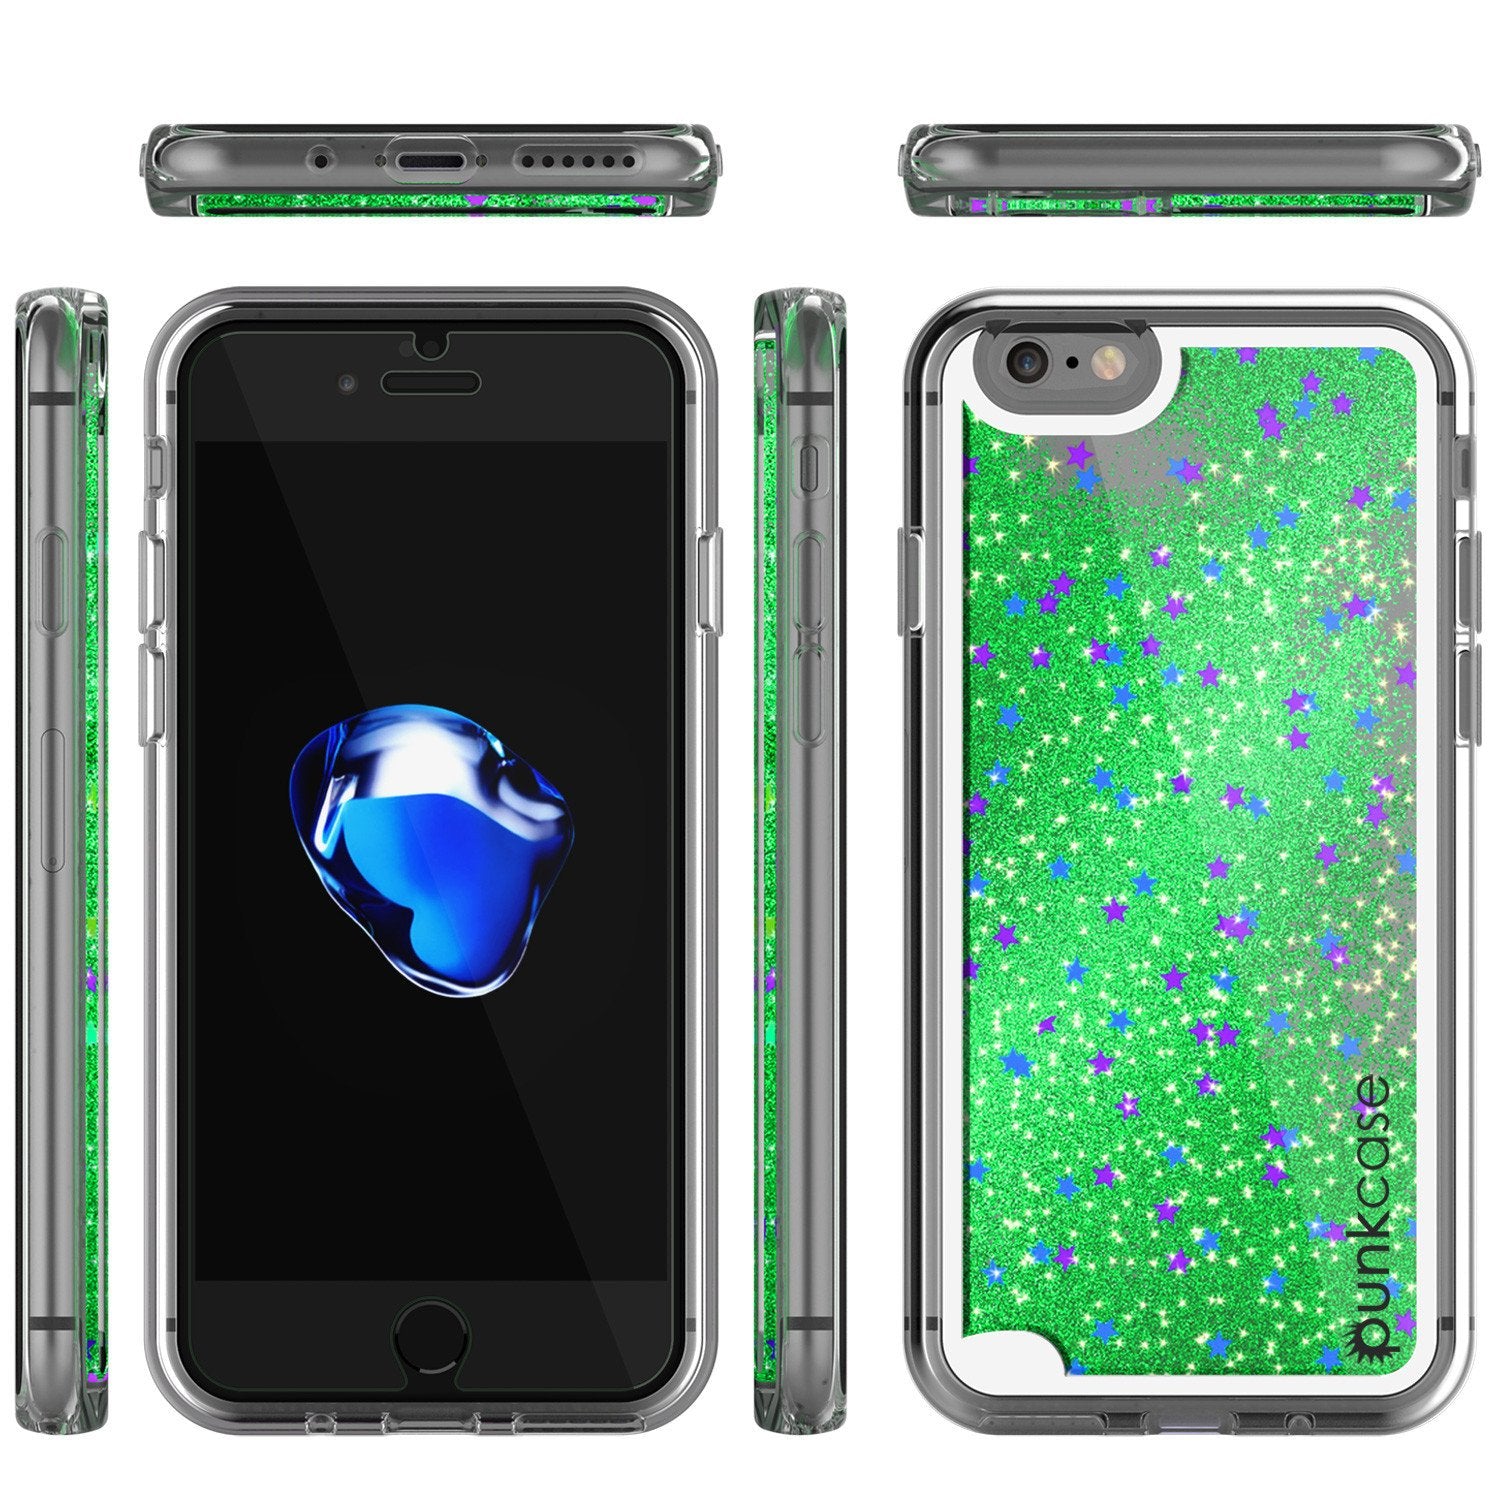 iPhone 7 Case, Punkcase [Liquid Green Series] Protective Dual Layer Floating Glitter Cover with lots of Bling & Sparkle + 0.3mm Tempered Glass Screen Protector for Apple iPhone 7s